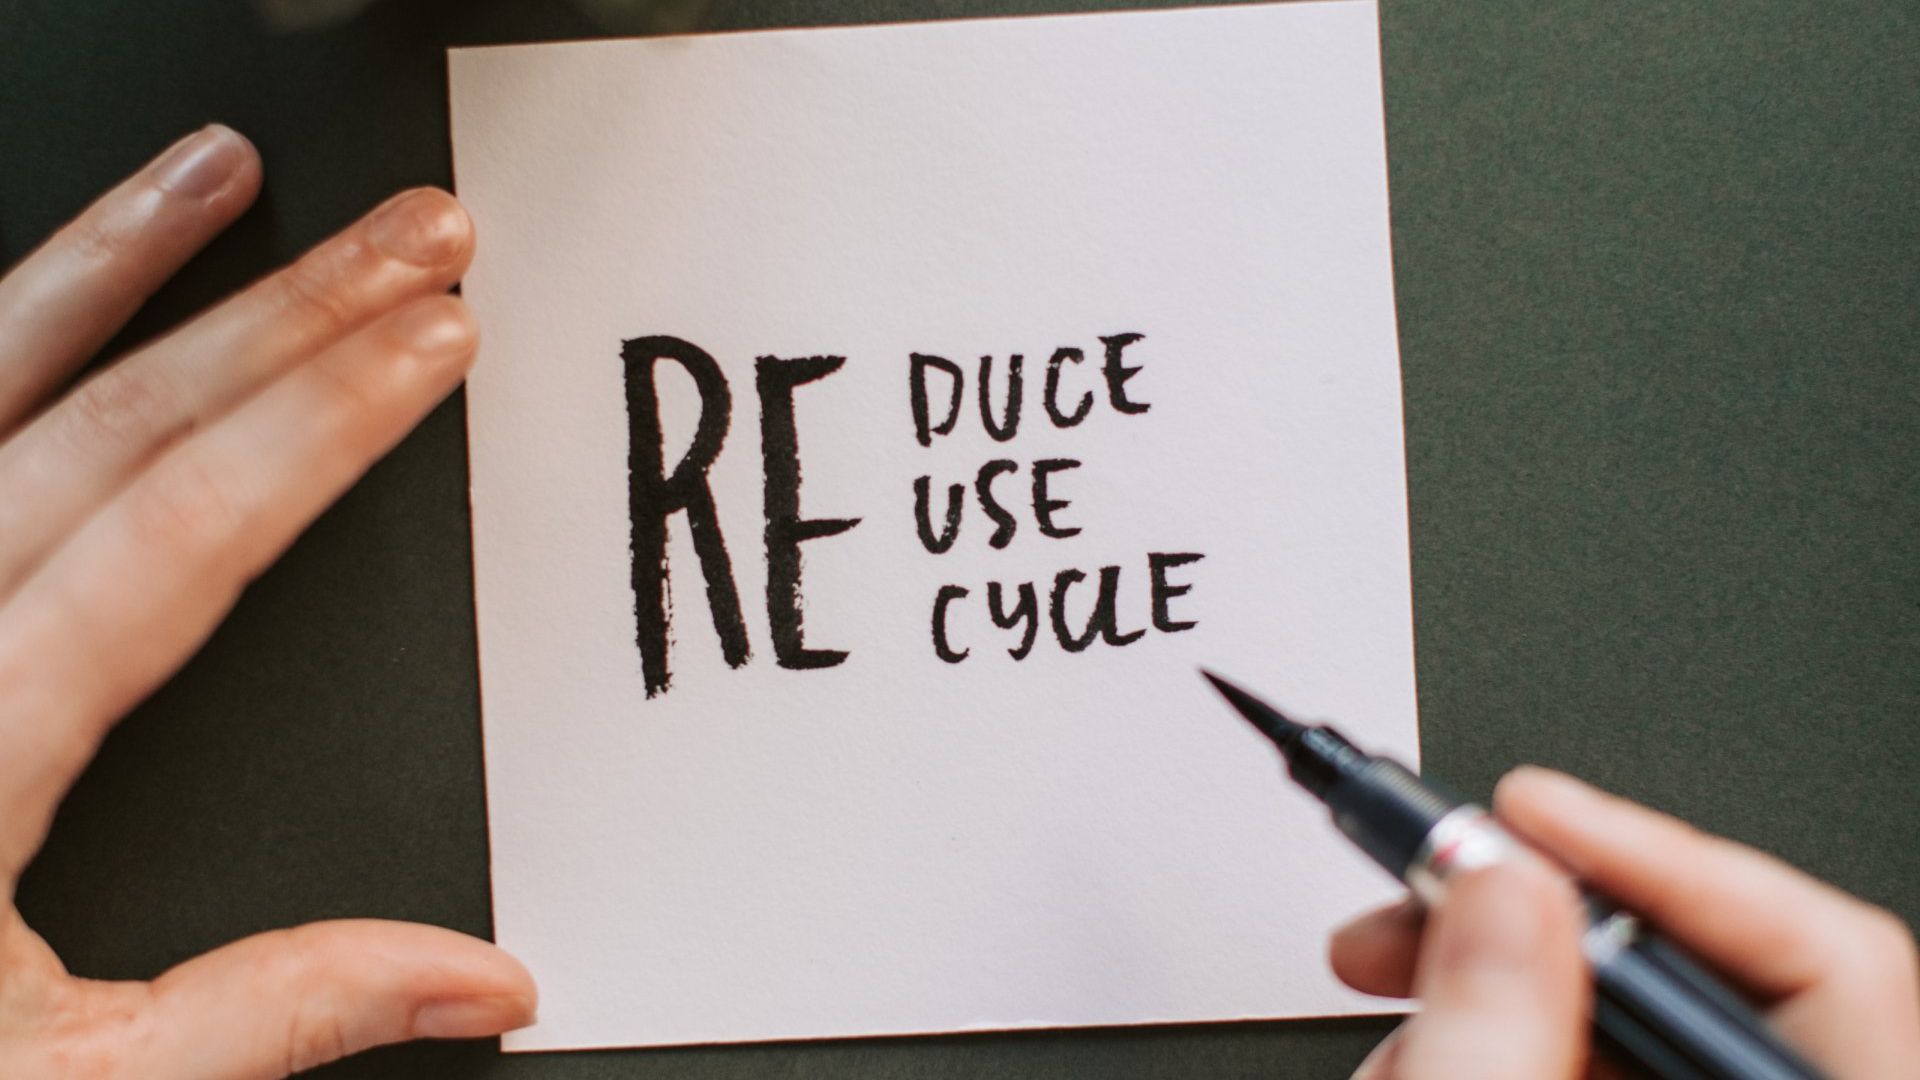 Reduce Re Use Re Cycle written on note